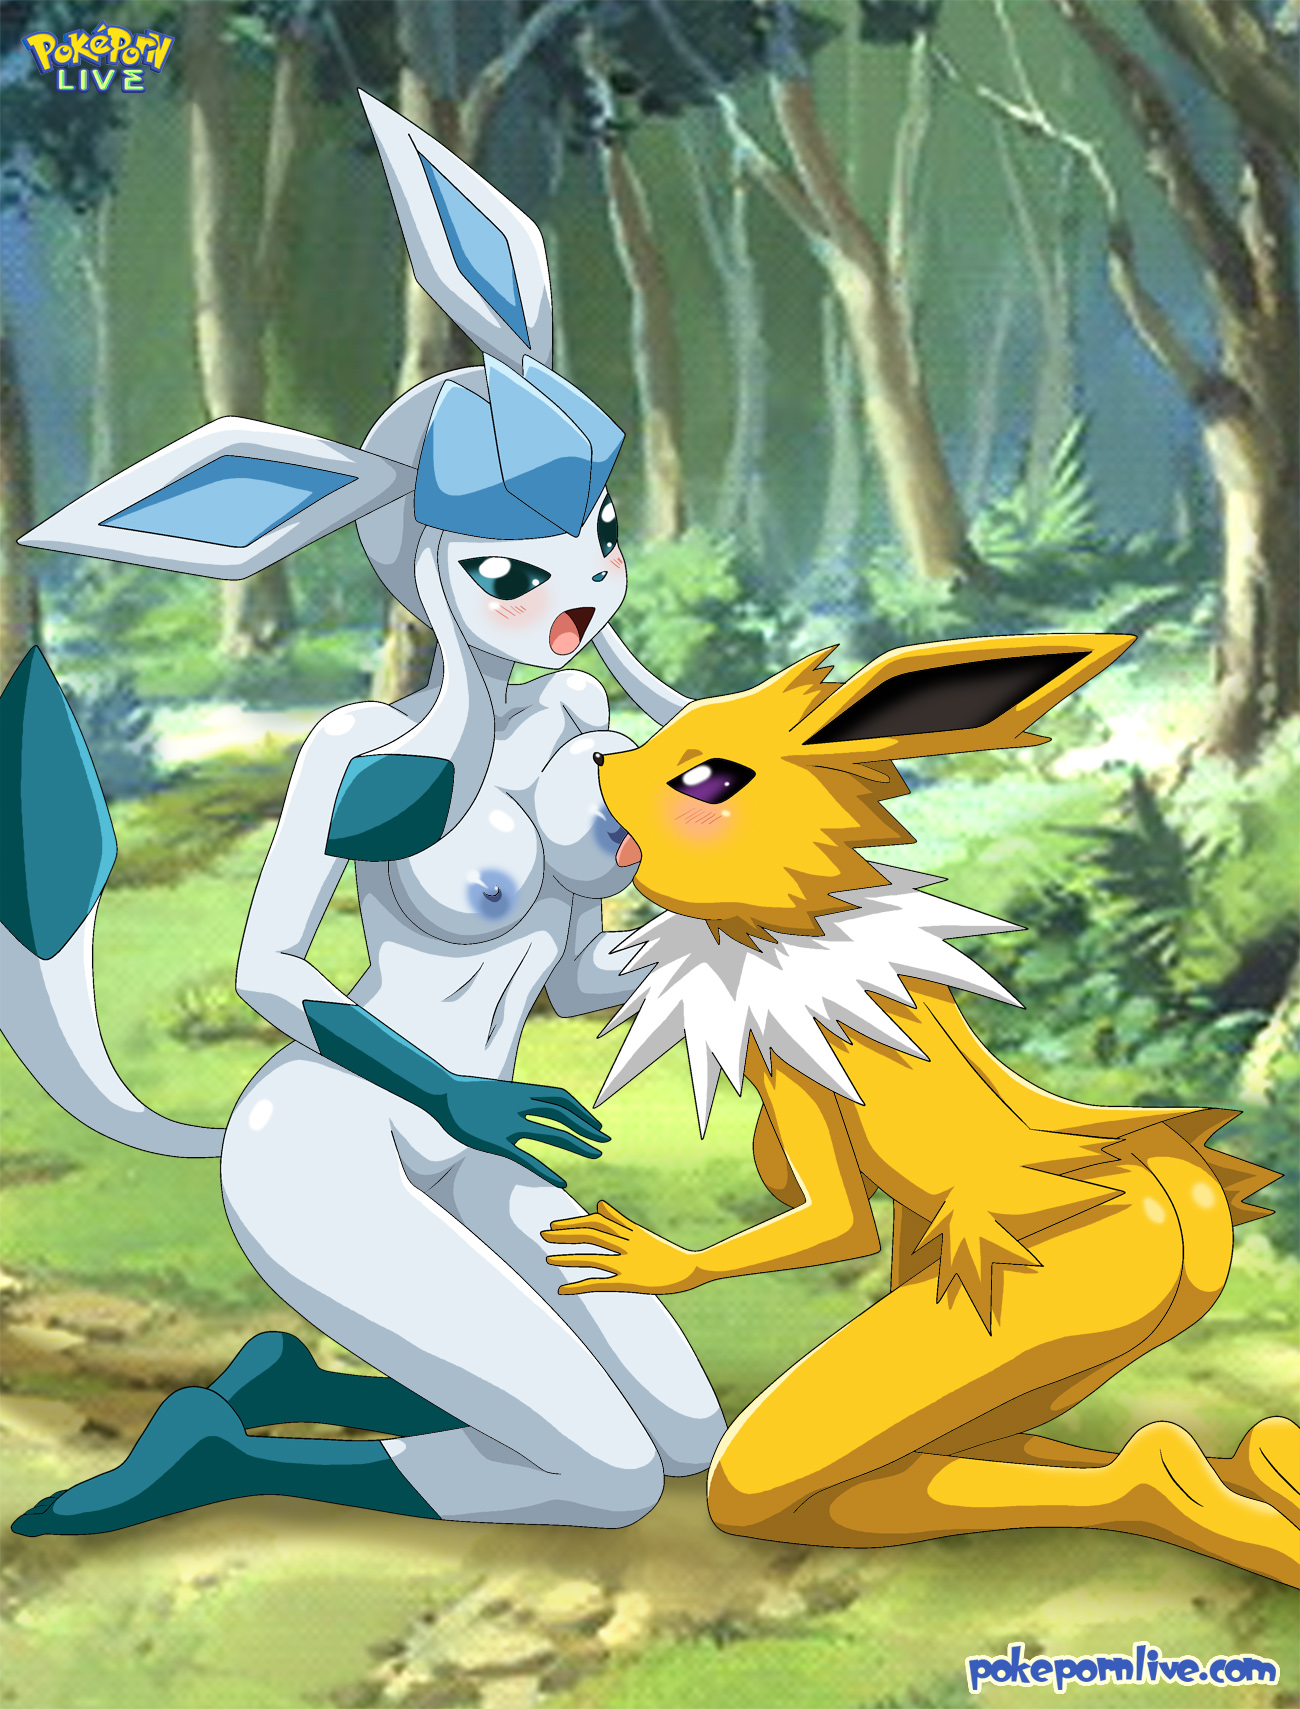 The Big ImageBoard (TBIB) - bbmbbf blush breasts duo eeveelution female  forest glaceon jelton jolteon lesbian licking nintendo nude pokÃ©mon pokÃ©mon  pokepornlive spikes tongue tree video games | 3394442